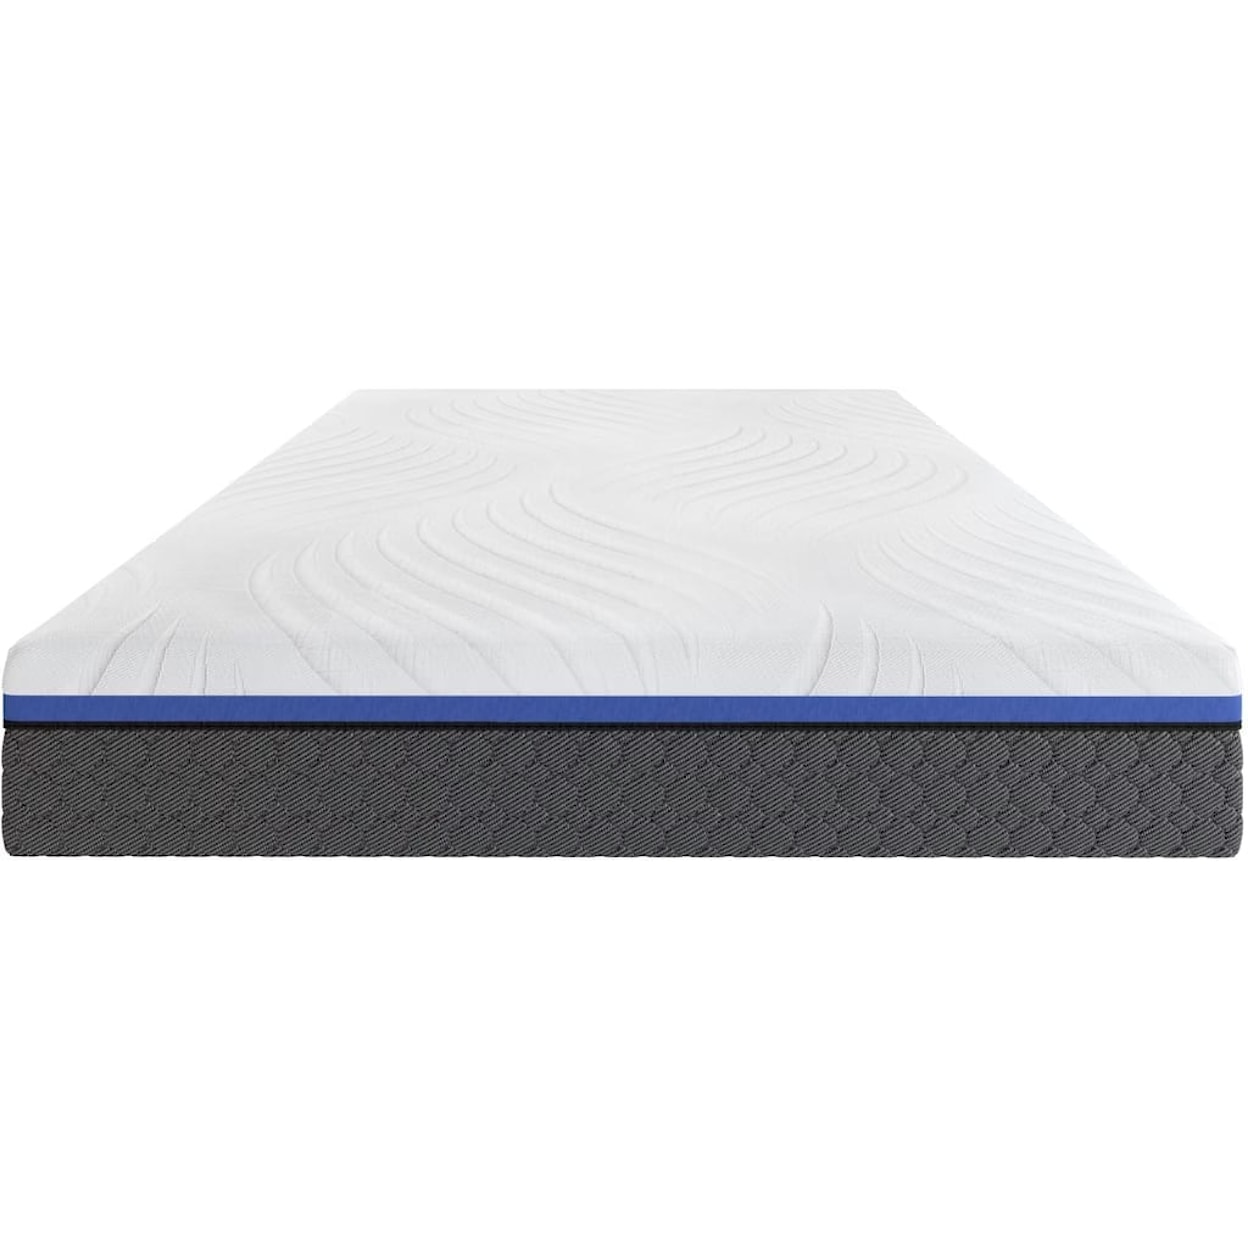 Elements International Butterfly 12 in King Mattress Compressed